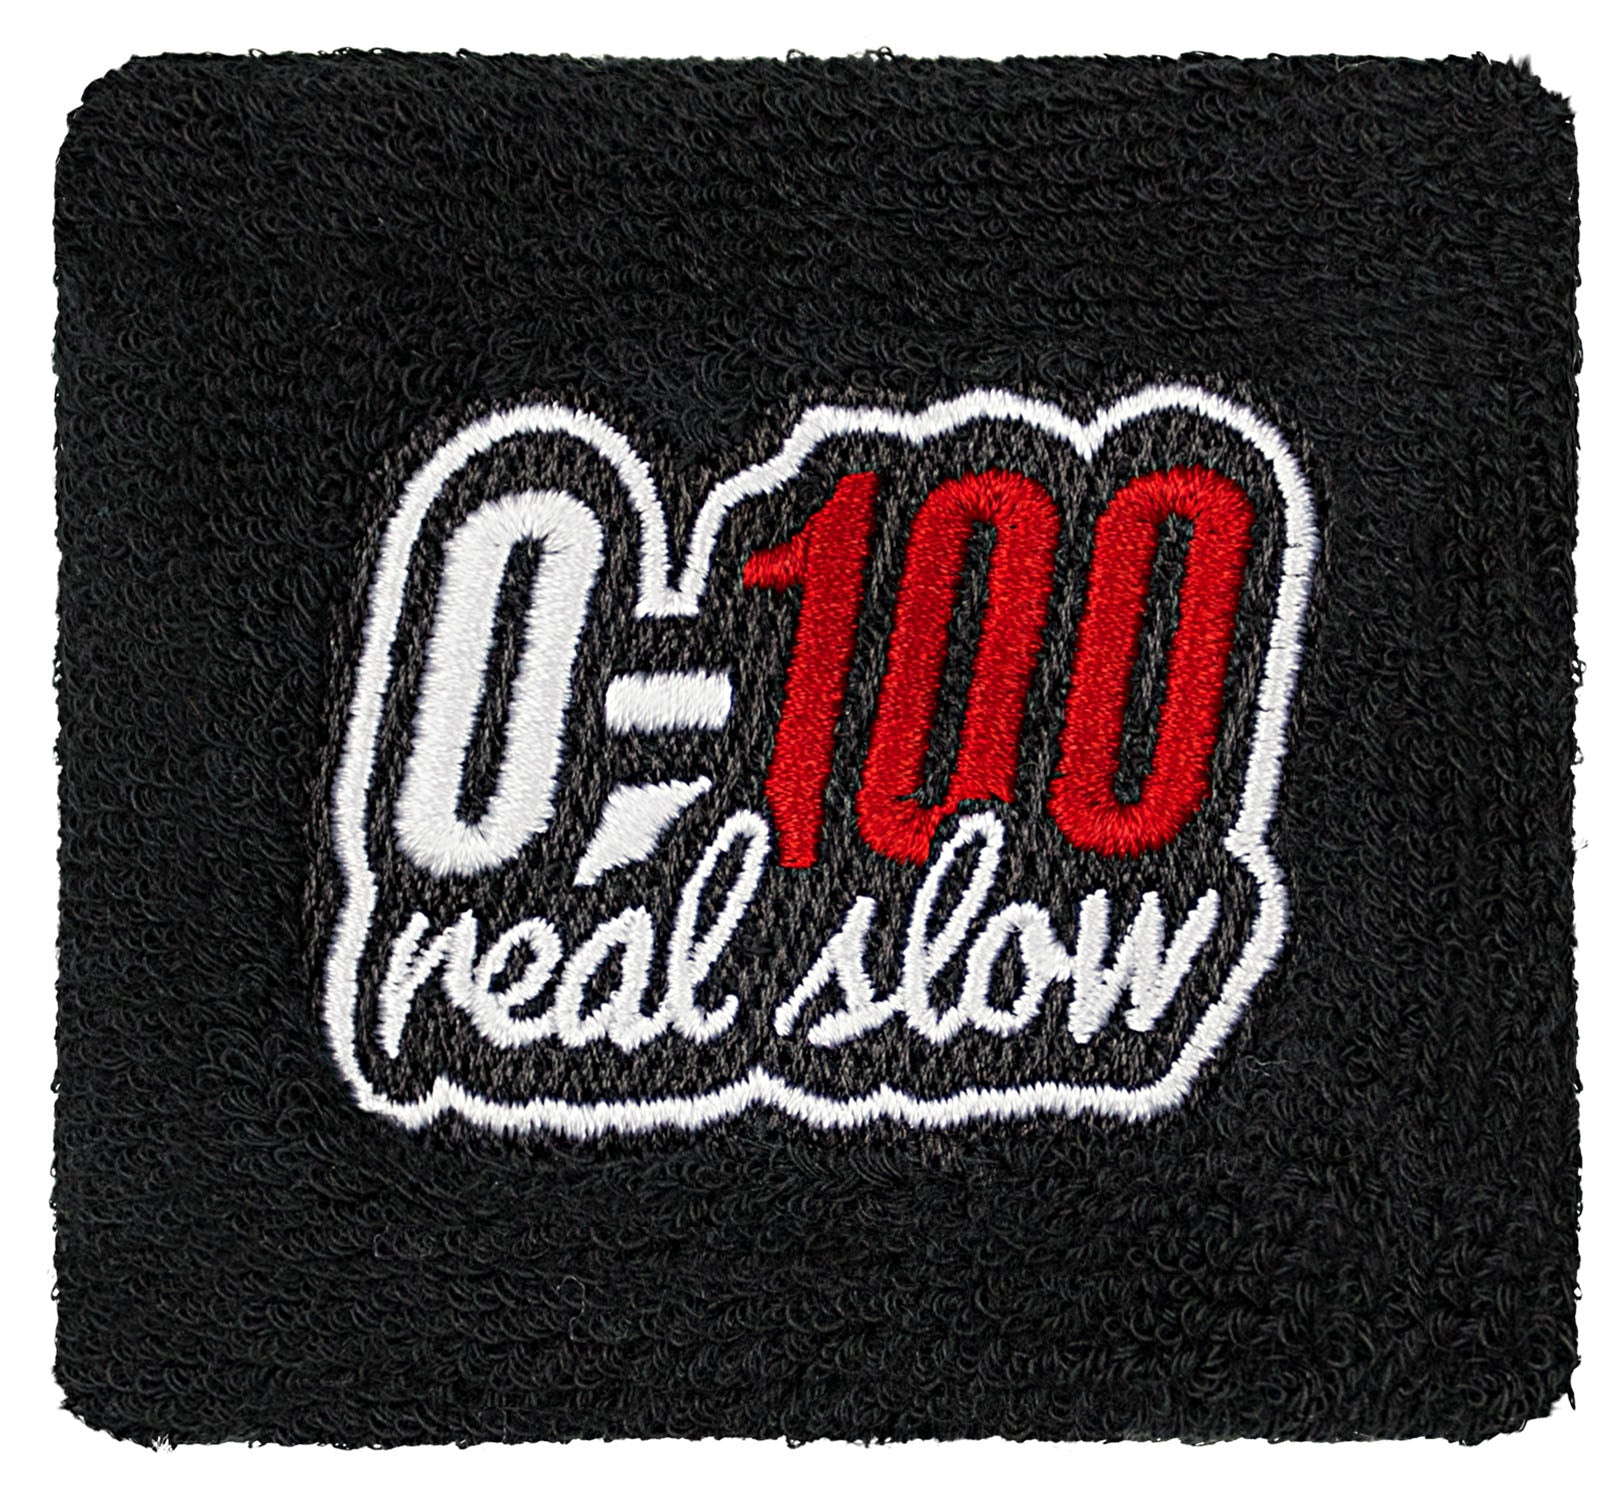 0-100 Real Slow - Reservoir Cover